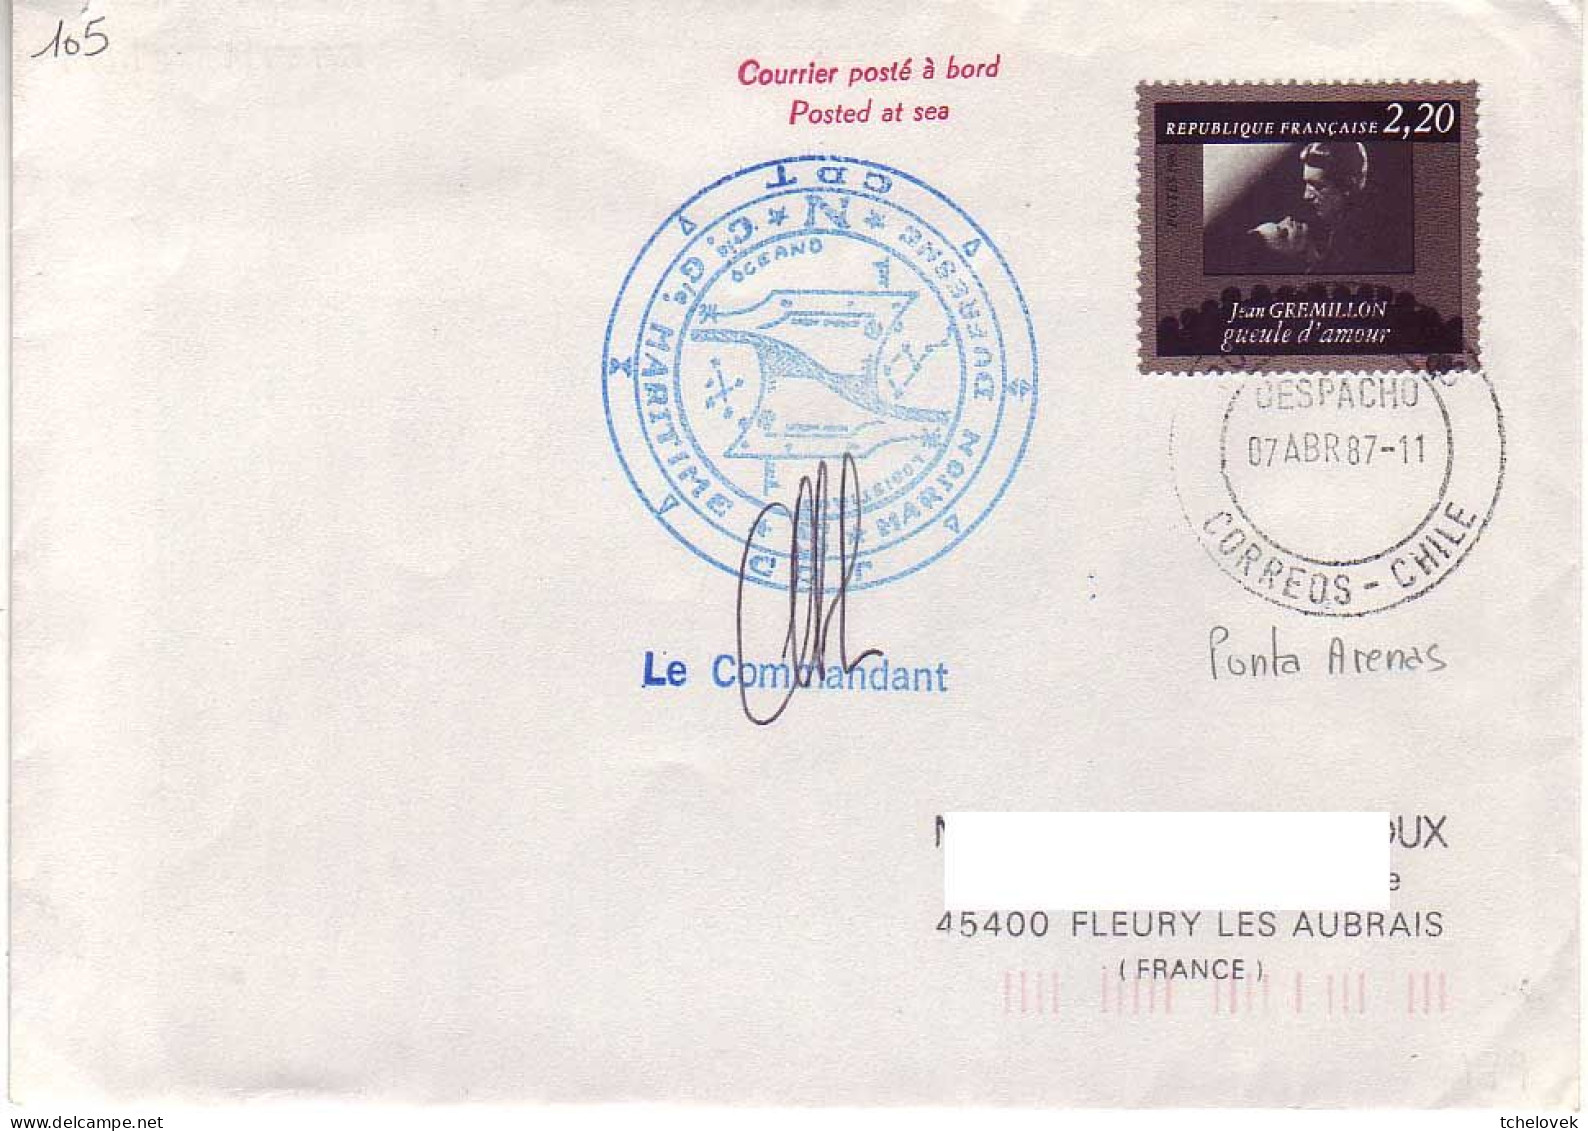 FSAT TAAF Marion Dufresne. 07.04.87 Punta Arenas - Covers & Documents